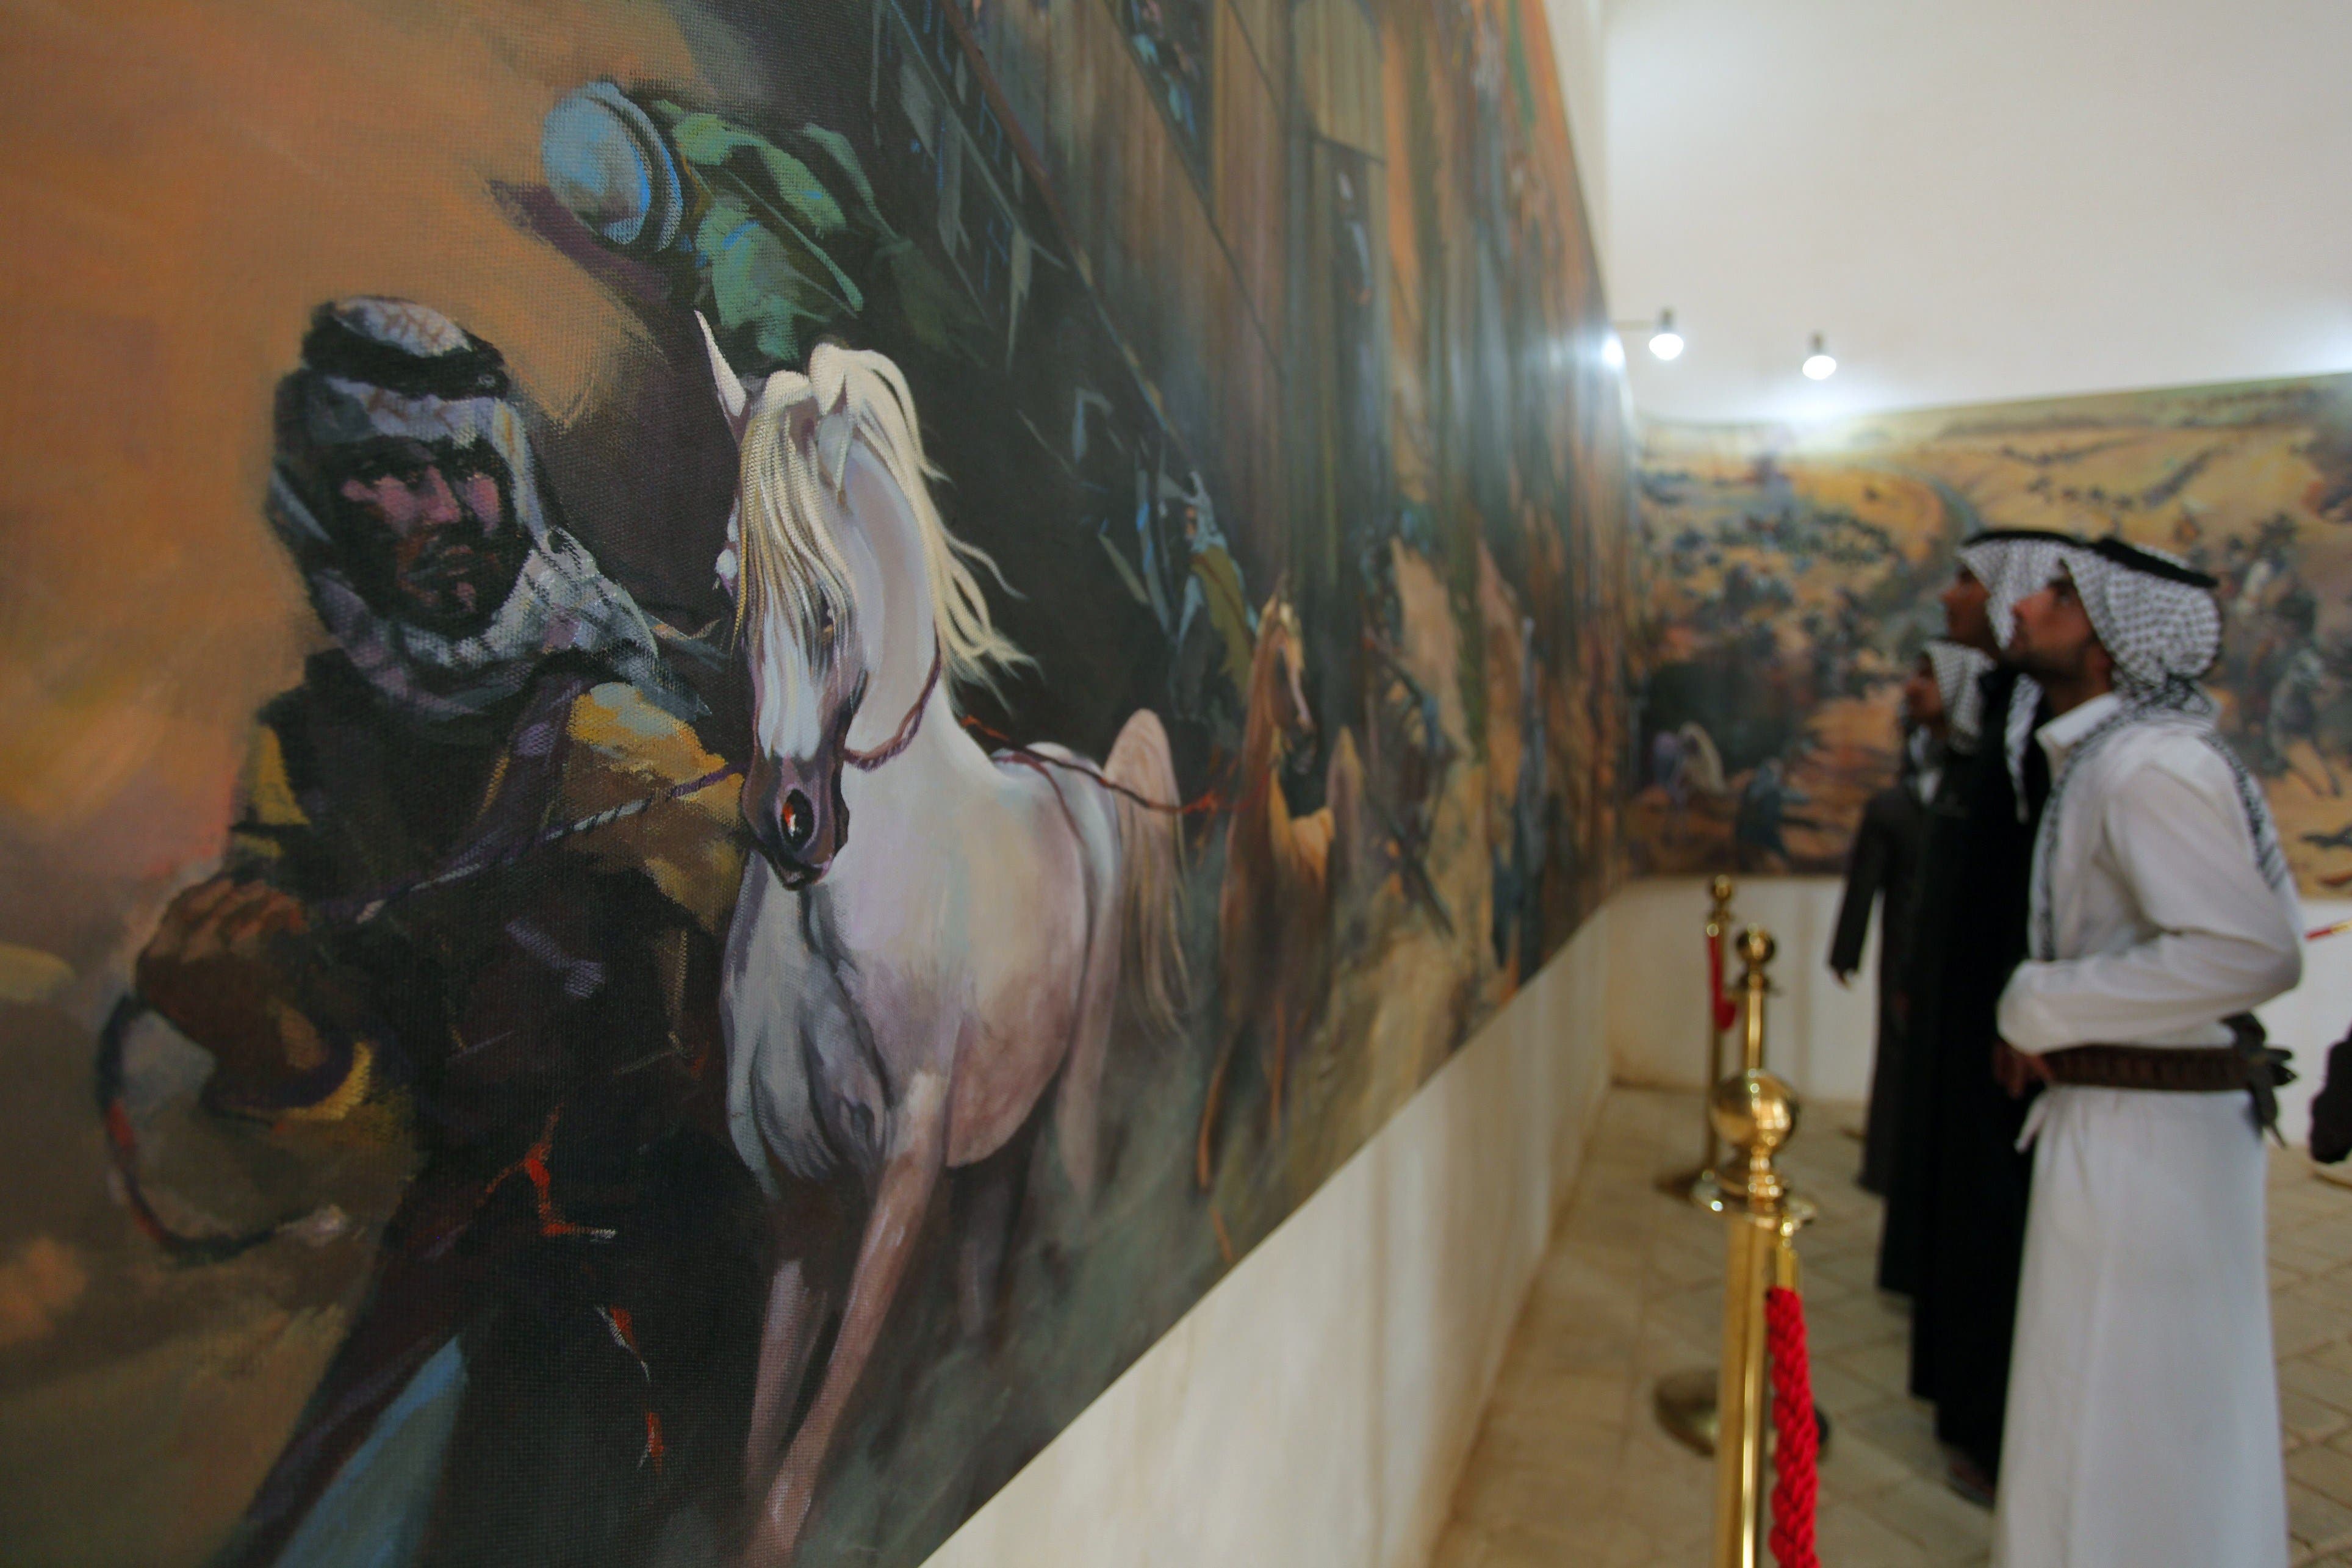  Iraqis visit the Najaf Heritage and 1920 Revolution Museum in the Khan al-Shilan building on February 27, 2014 in the holy city of Najaf, central Iraq. (AFP)